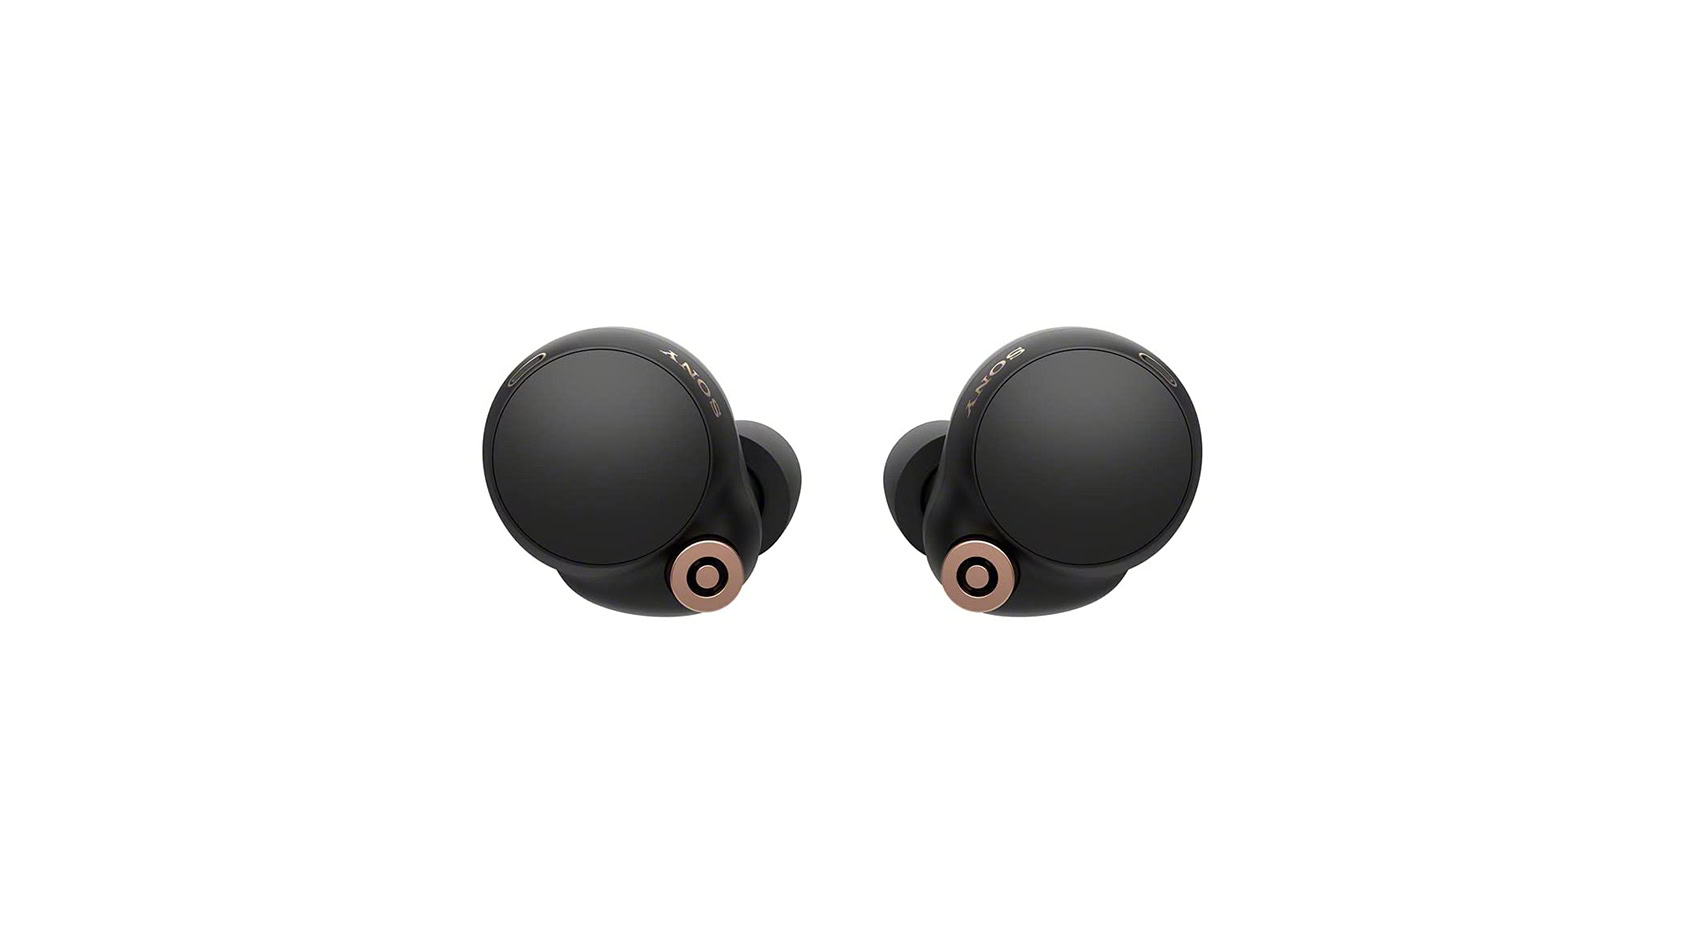 The Sony WF-1000XM4 noise-cancelling true wireless earbuds in black against a white background.